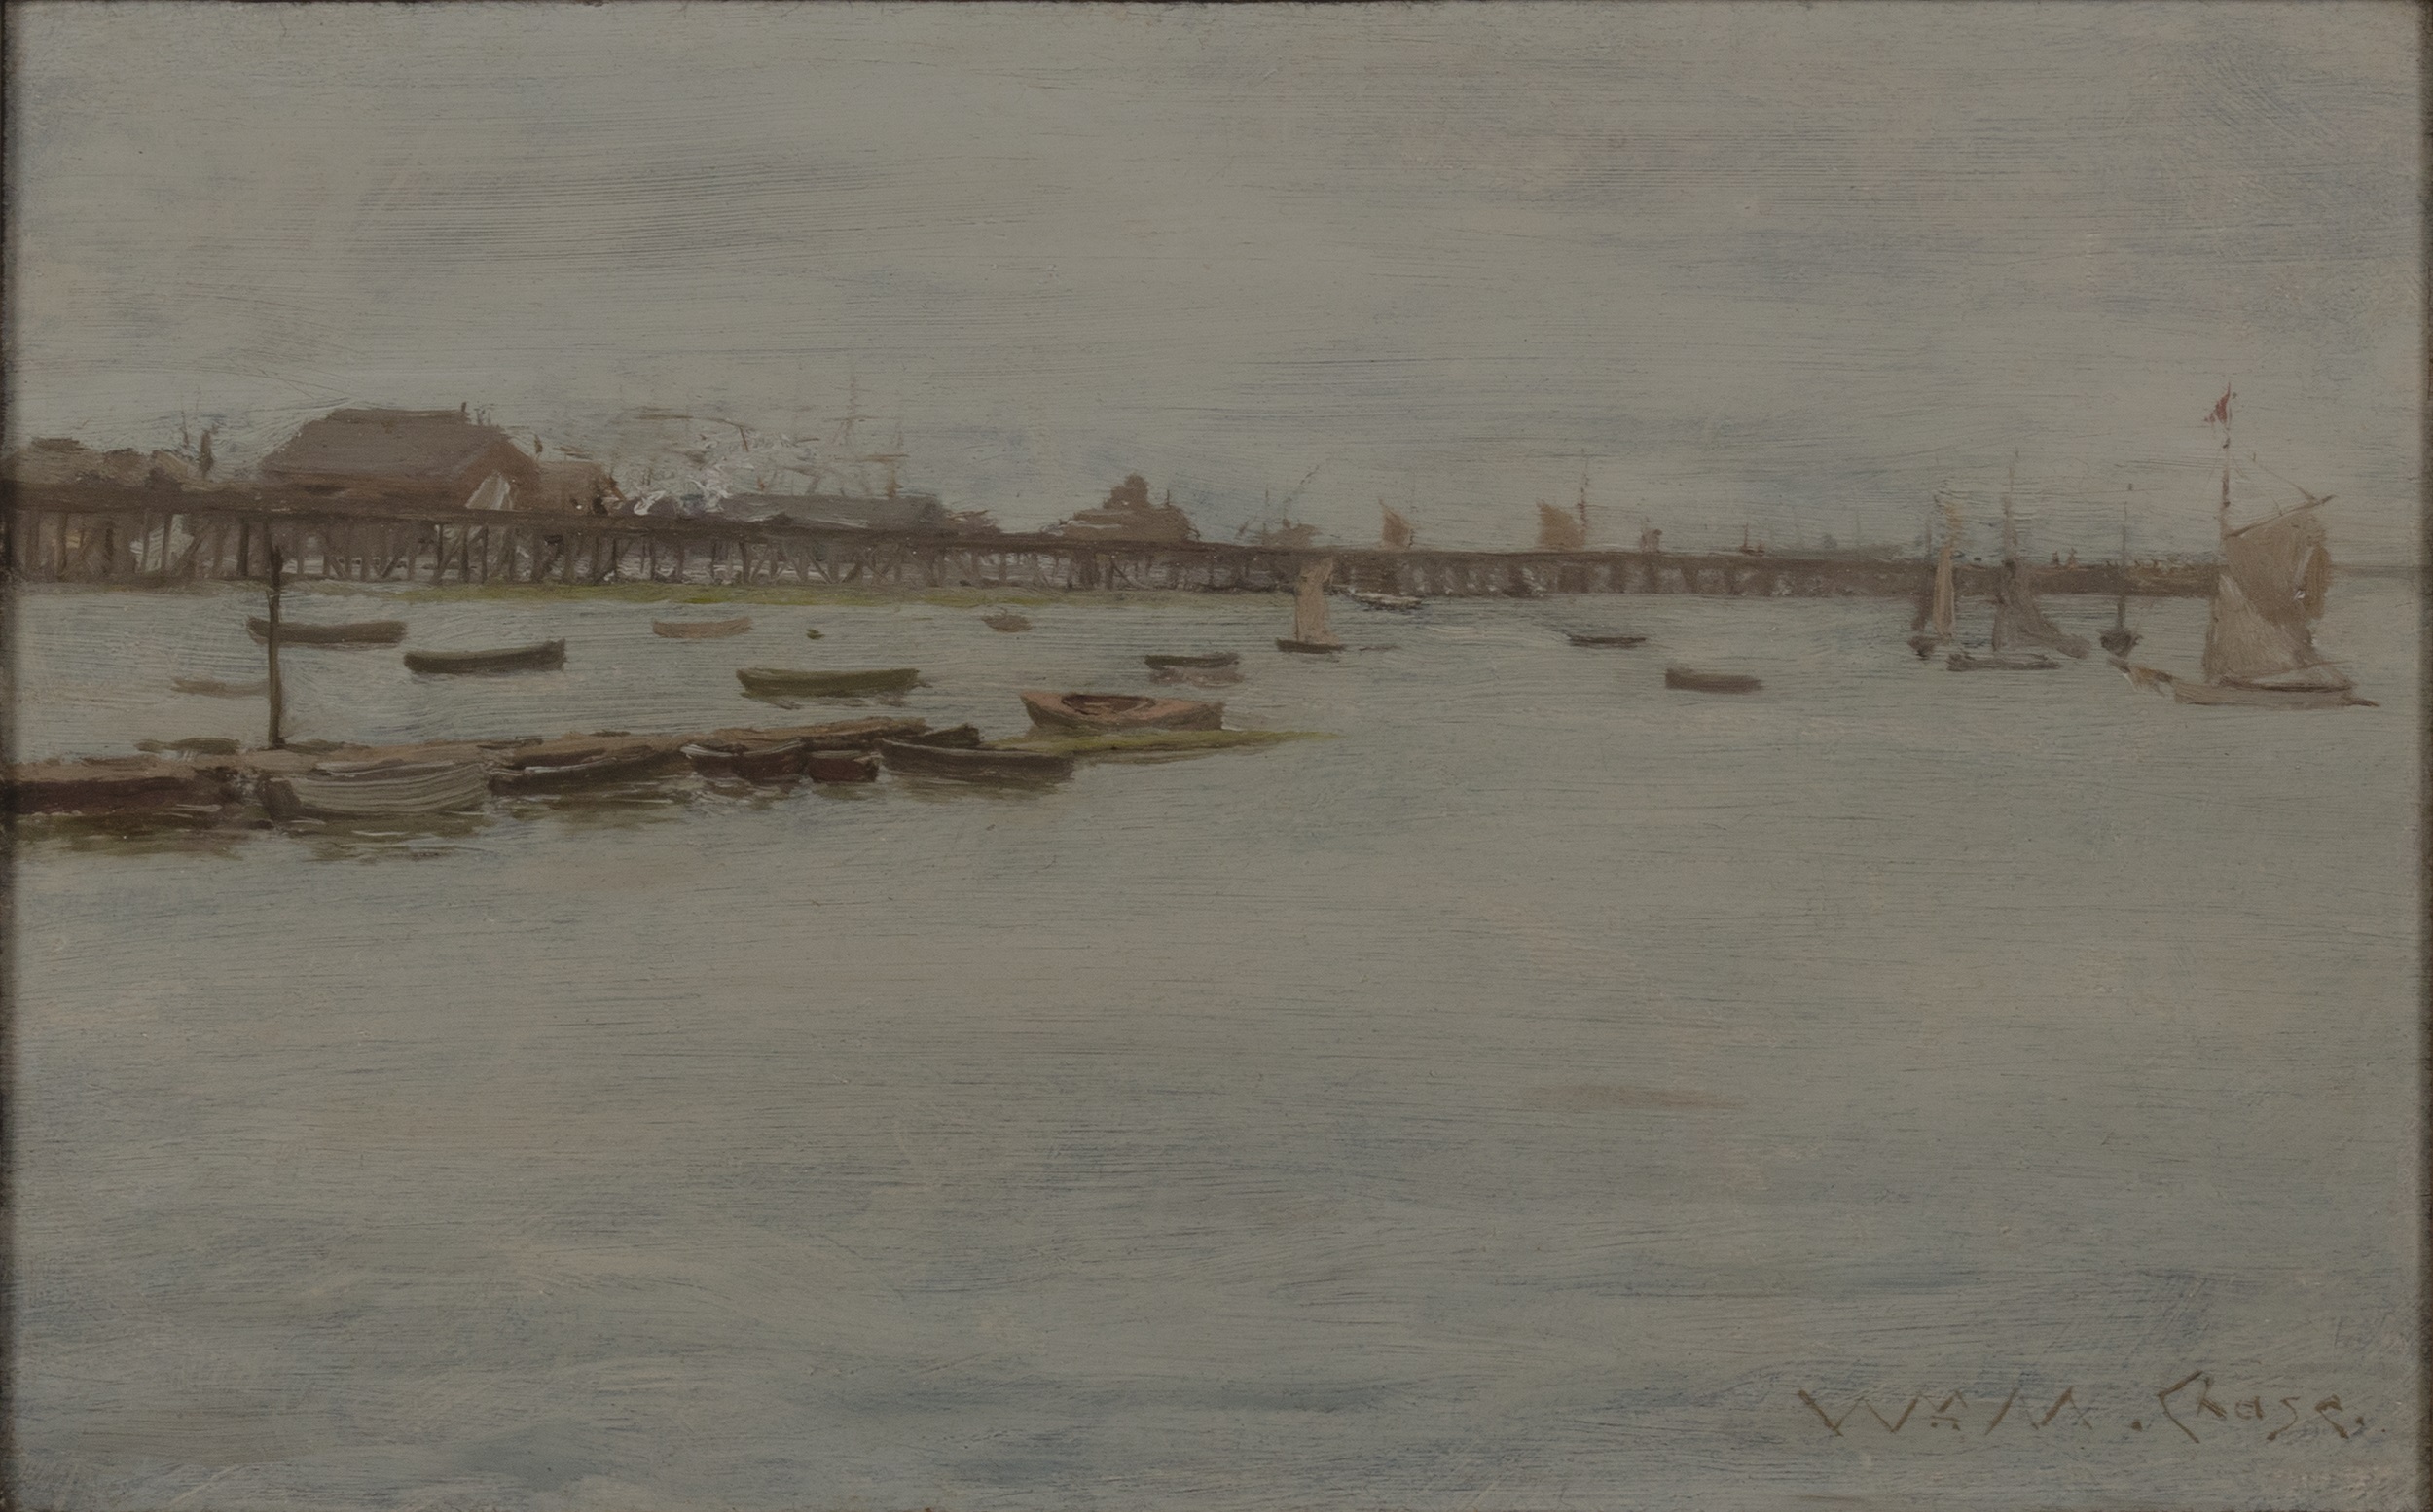 Impressionistic painting of a harbor with a long, elevated wooden pier, and a shorter one in front of it. Both the water and the sky are gray.